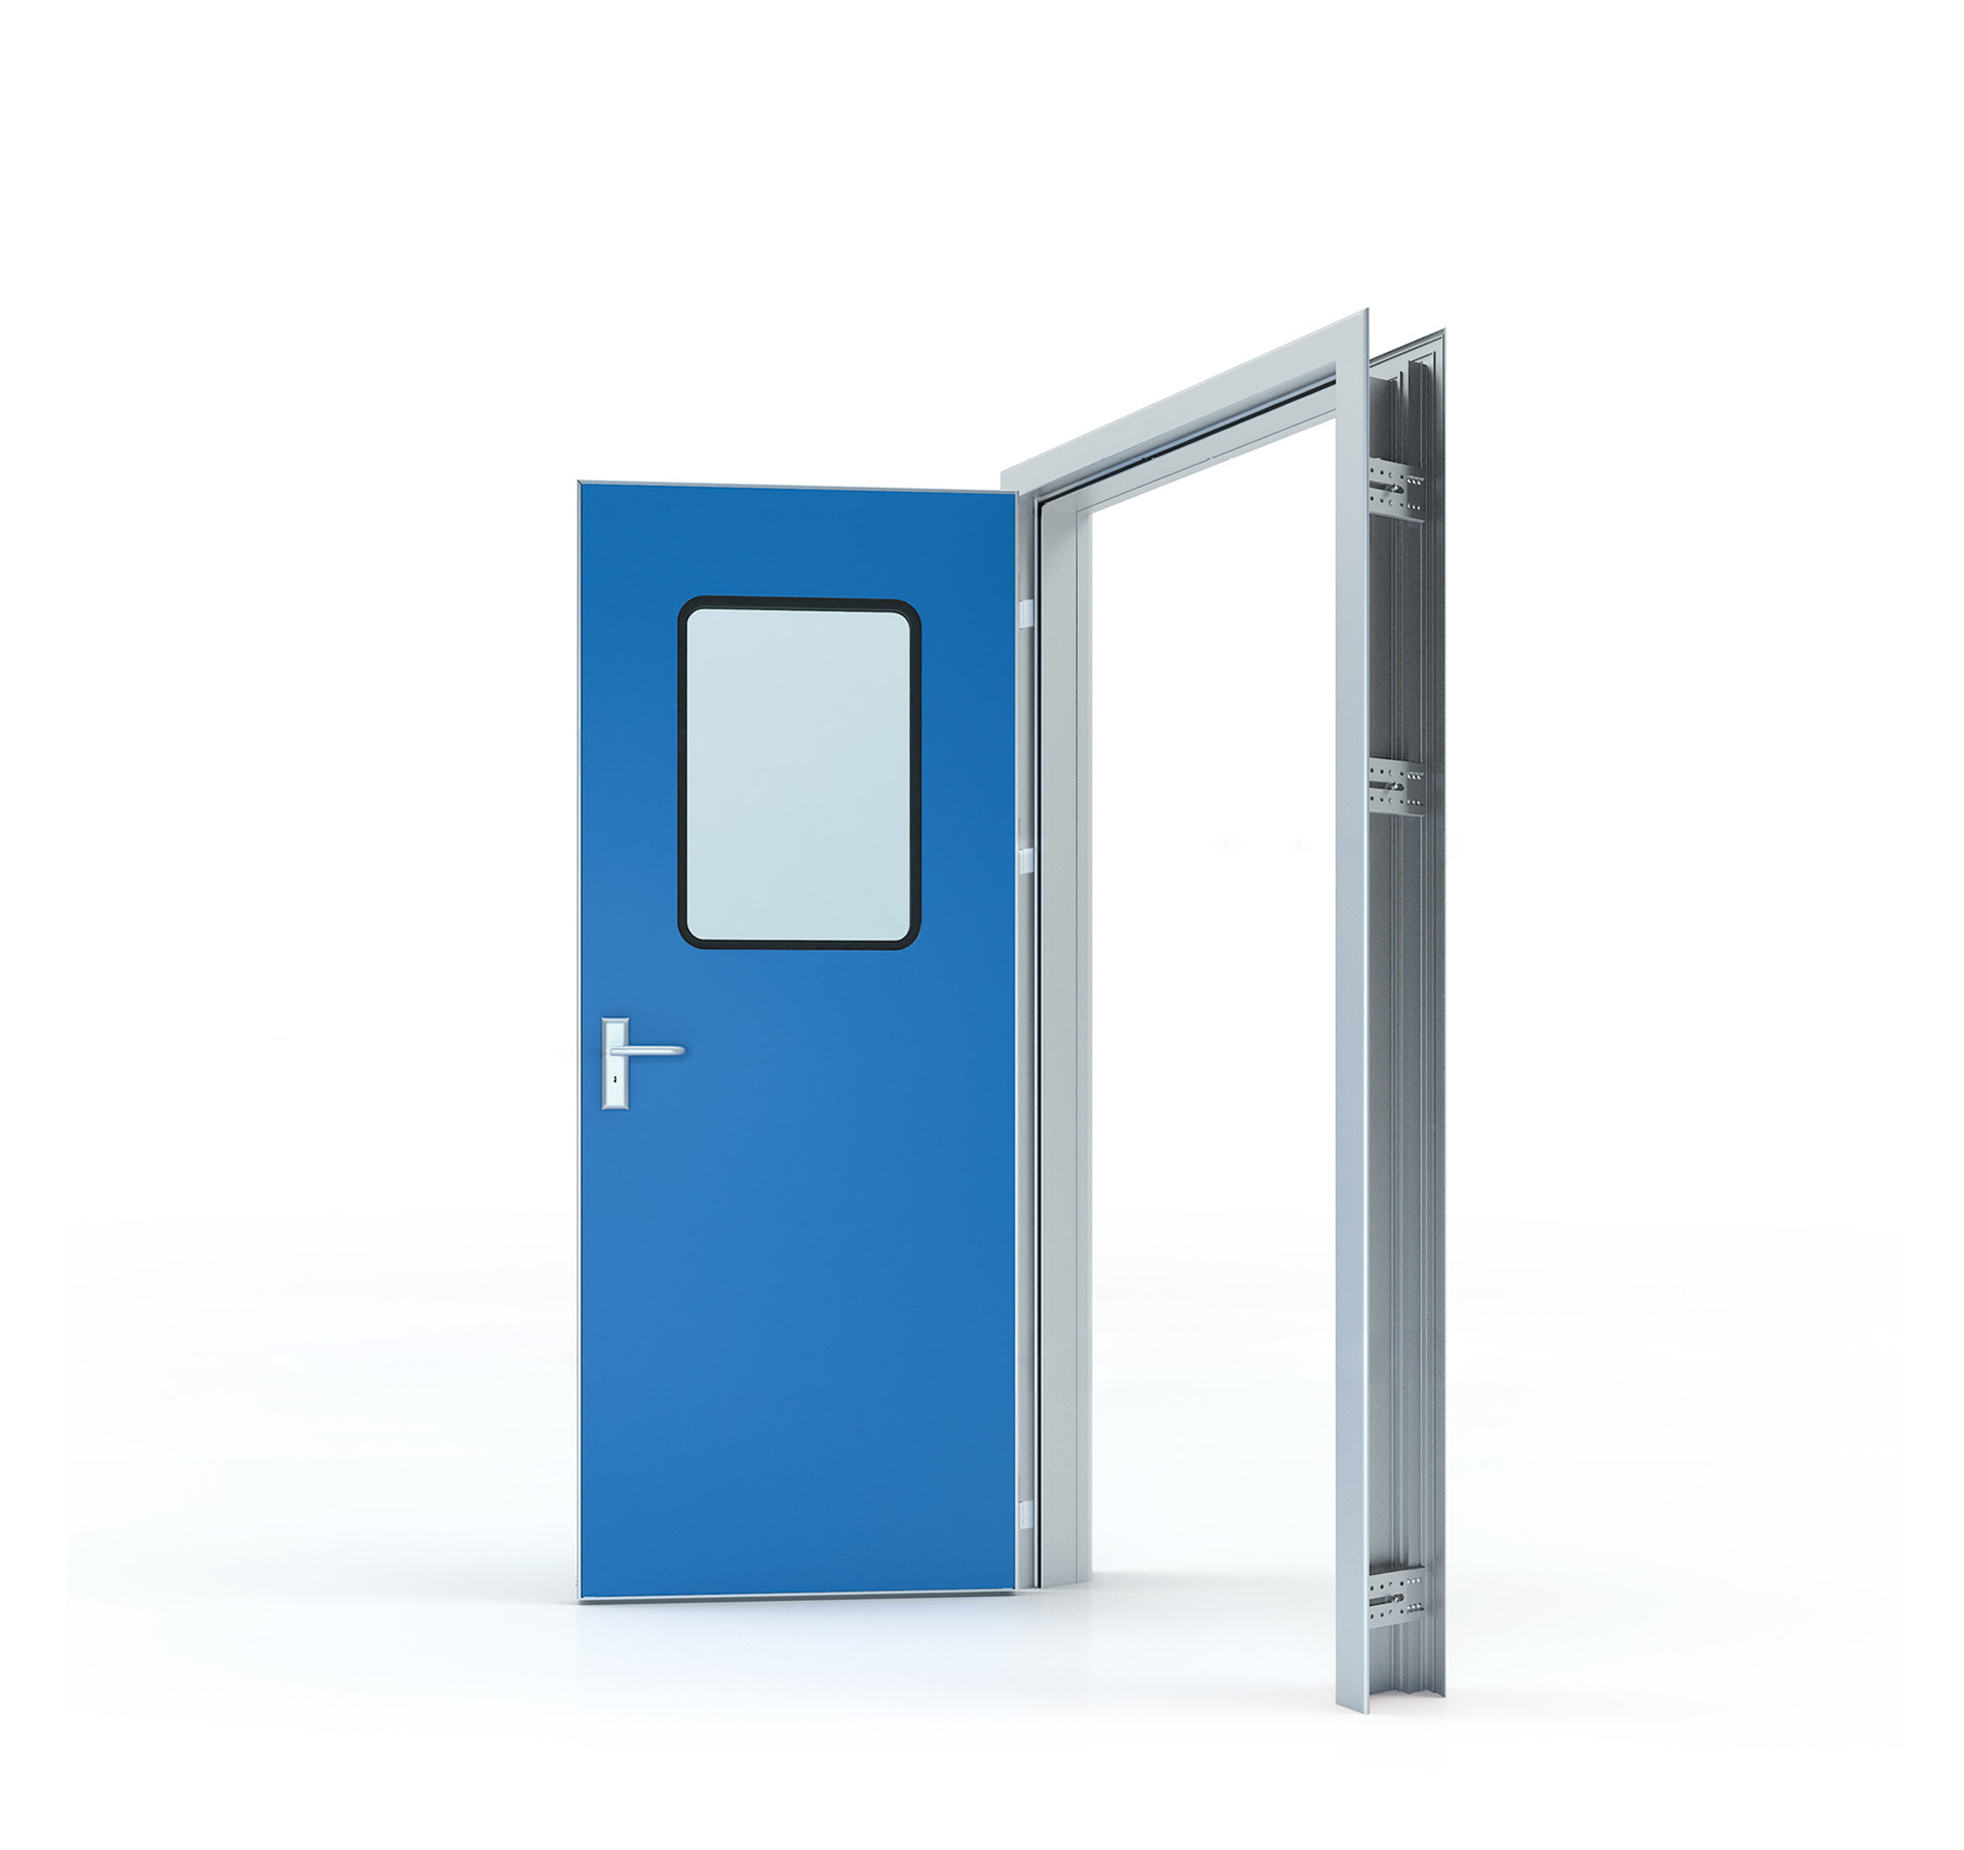 Multi style customized UL standard 90-minute shelter fire safety solid door blue